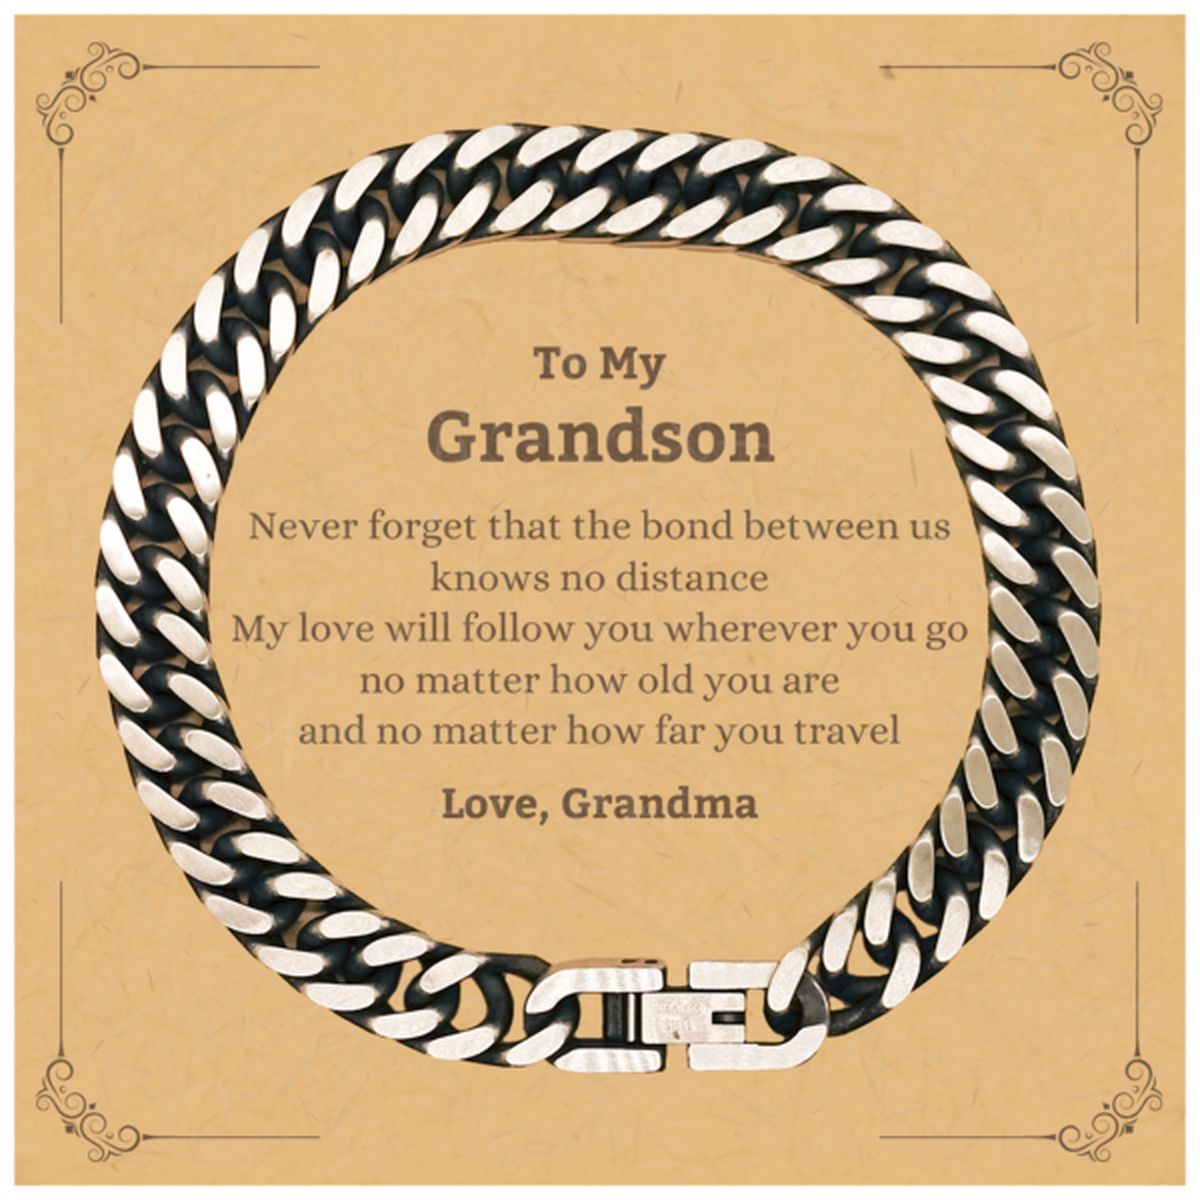 Grandson Birthday Gifts from Grandma, Adjustable Cuban Link Chain Bracelet for Grandson Christmas Graduation Unique Gifts Grandson Never forget that the bond between us knows no distance. Love, Grandma